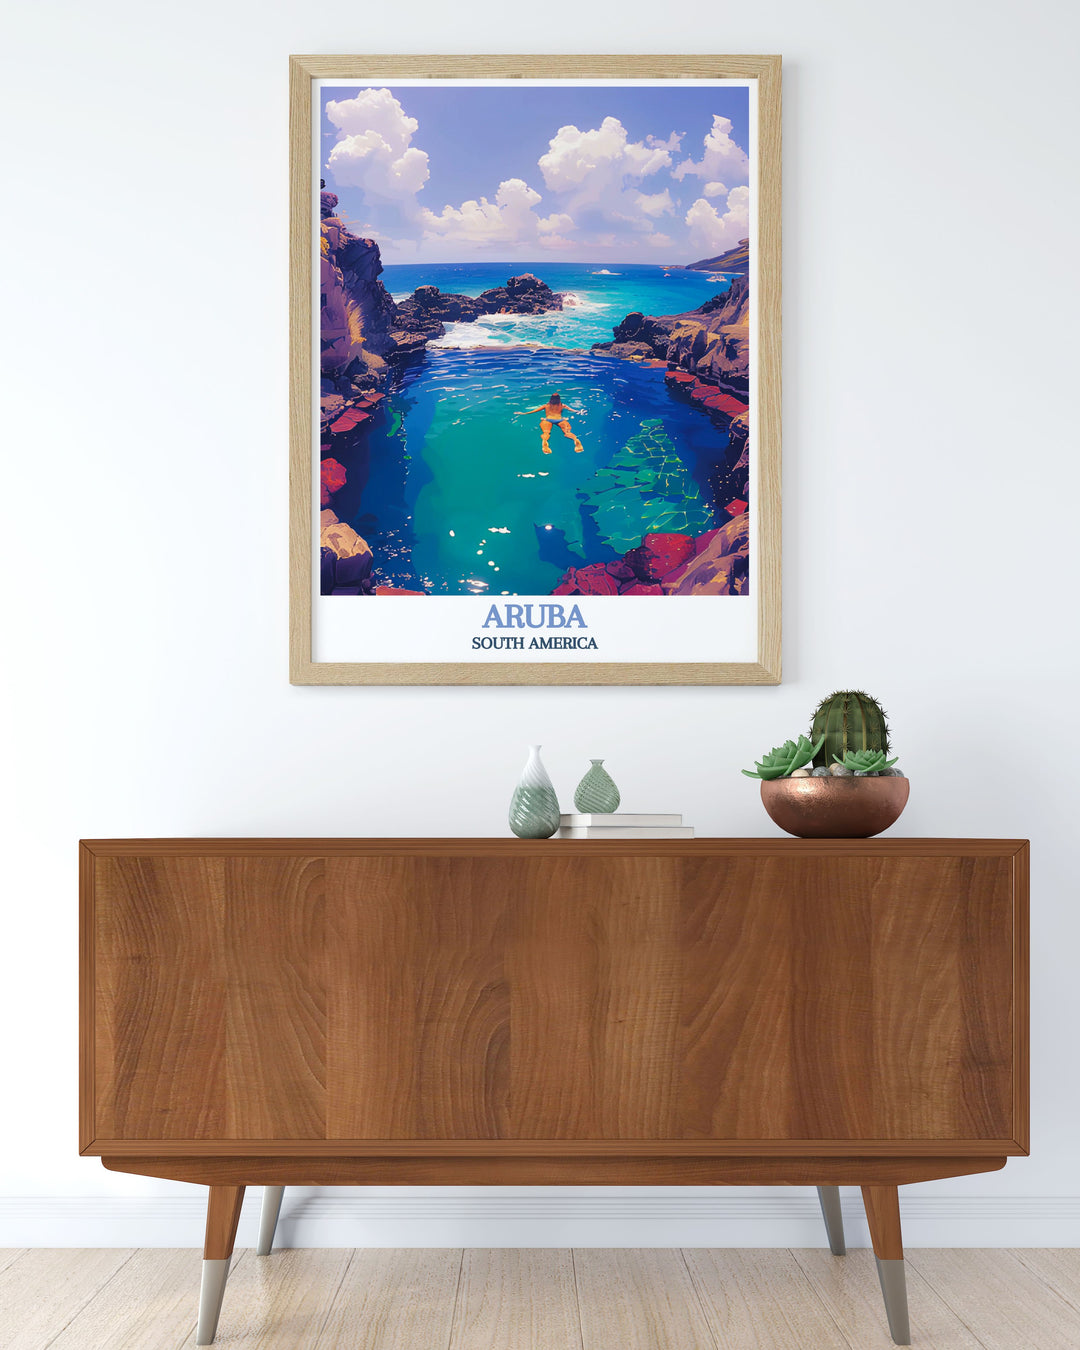 Aruba art print highlighting the natural beauty and vibrant colors of the Natural Pool an ideal piece for nature lovers and adventurers looking to bring a touch of the Caribbean into their homes with high quality fine line artwork